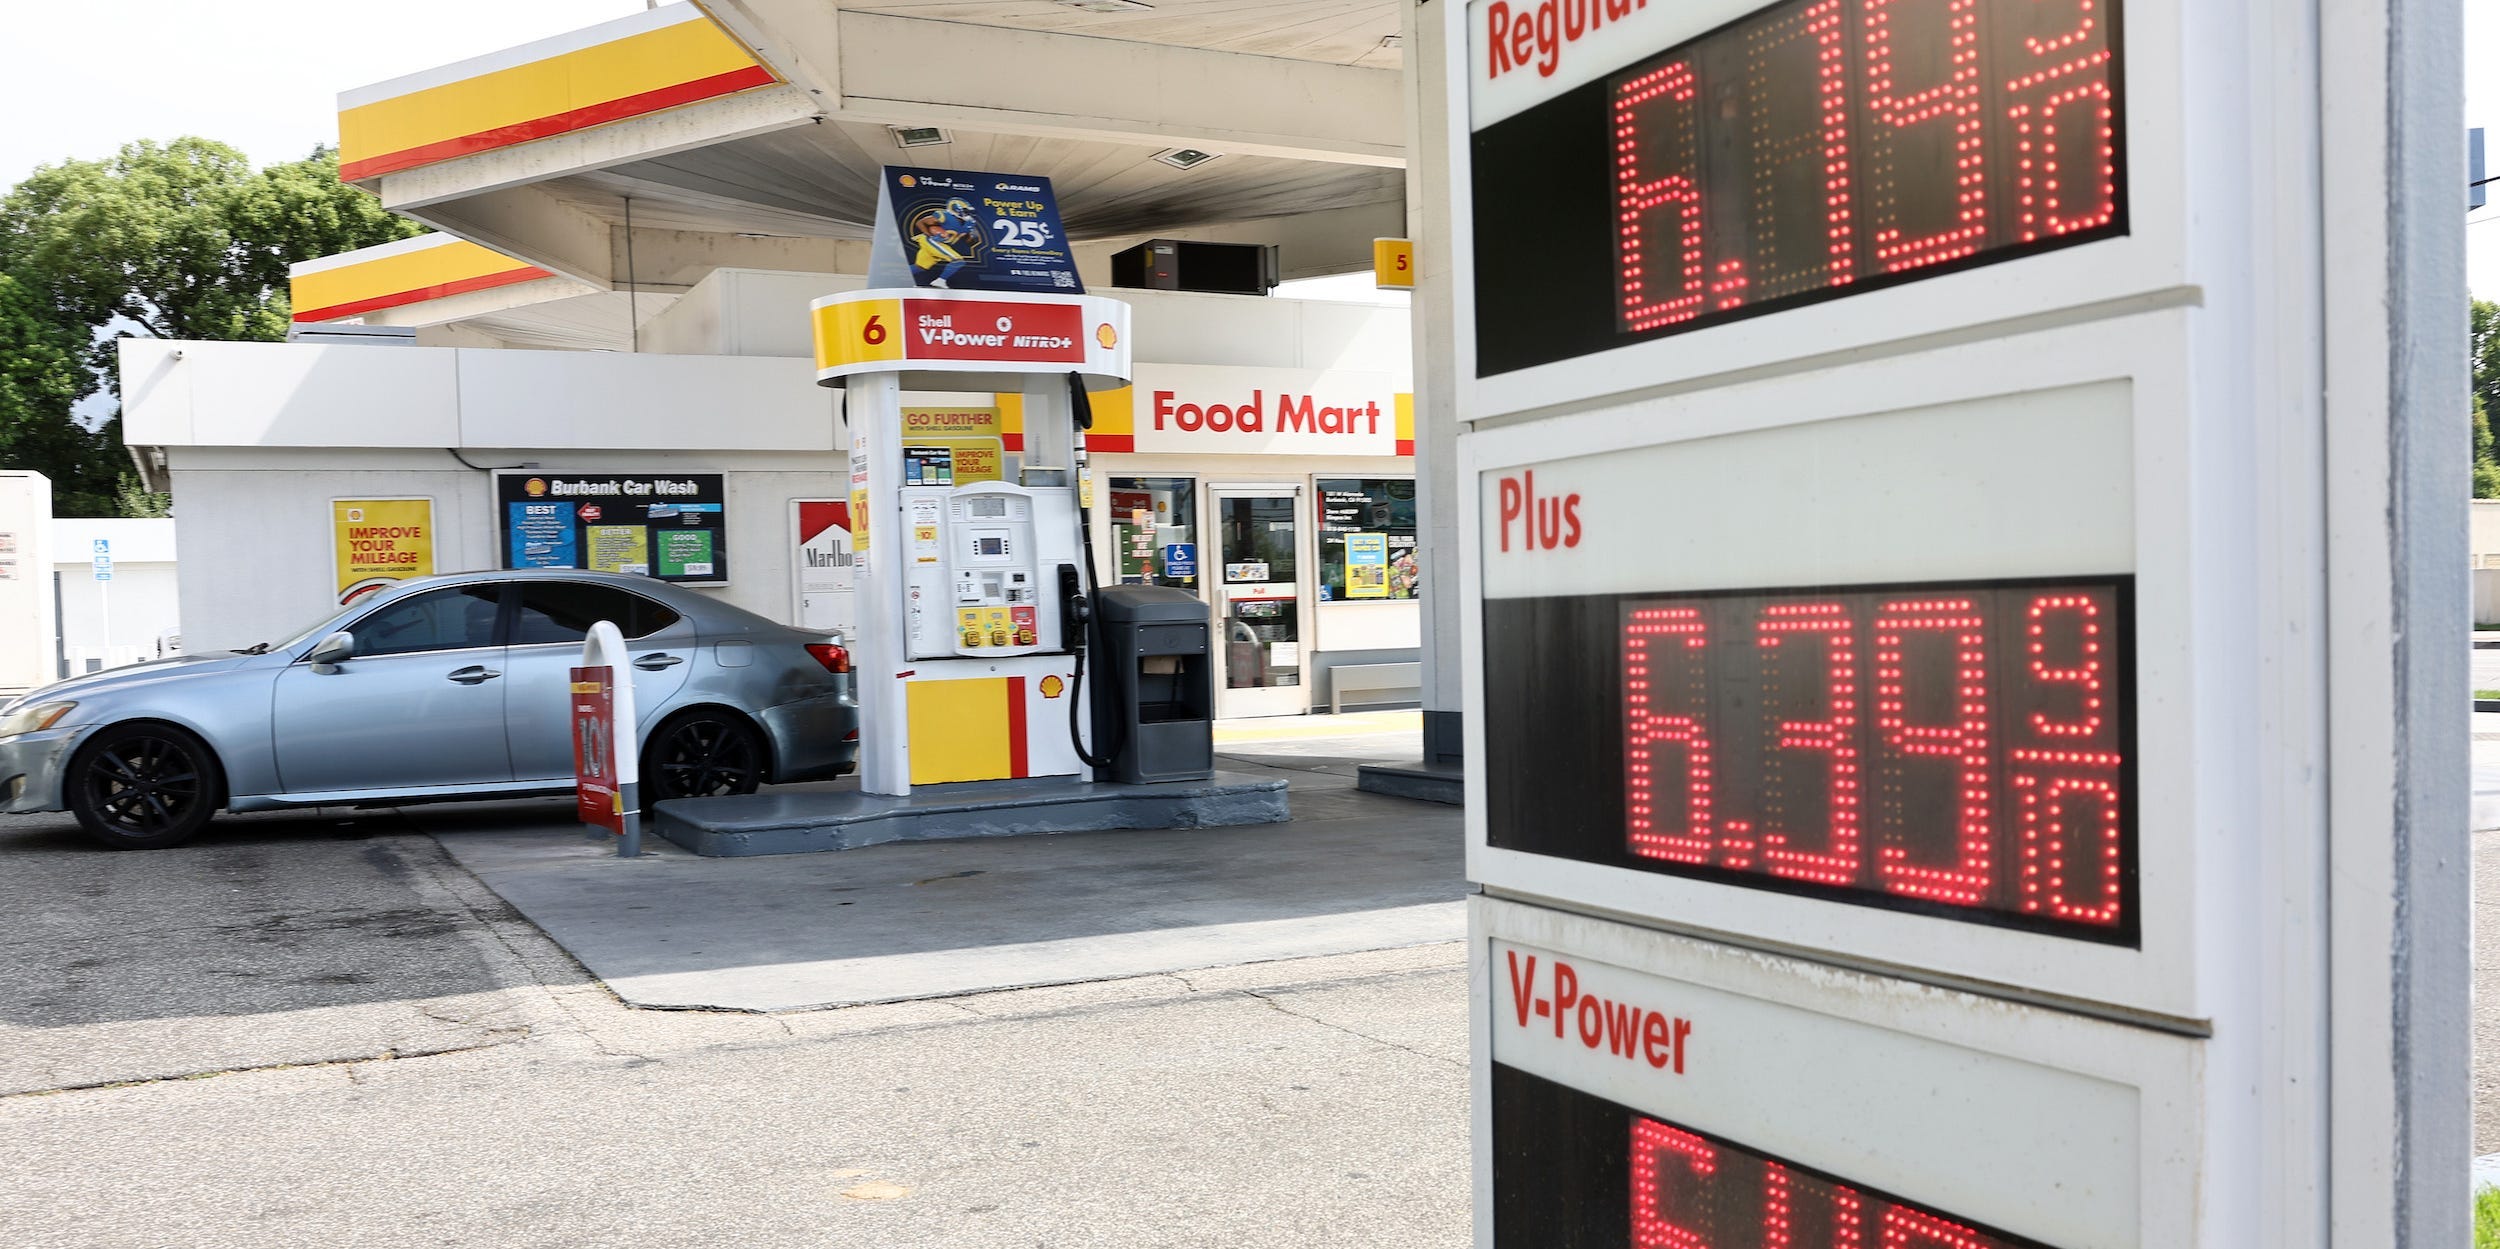 us gas prices have tumbled for 2 months to notch their longest streak of declines in over a year